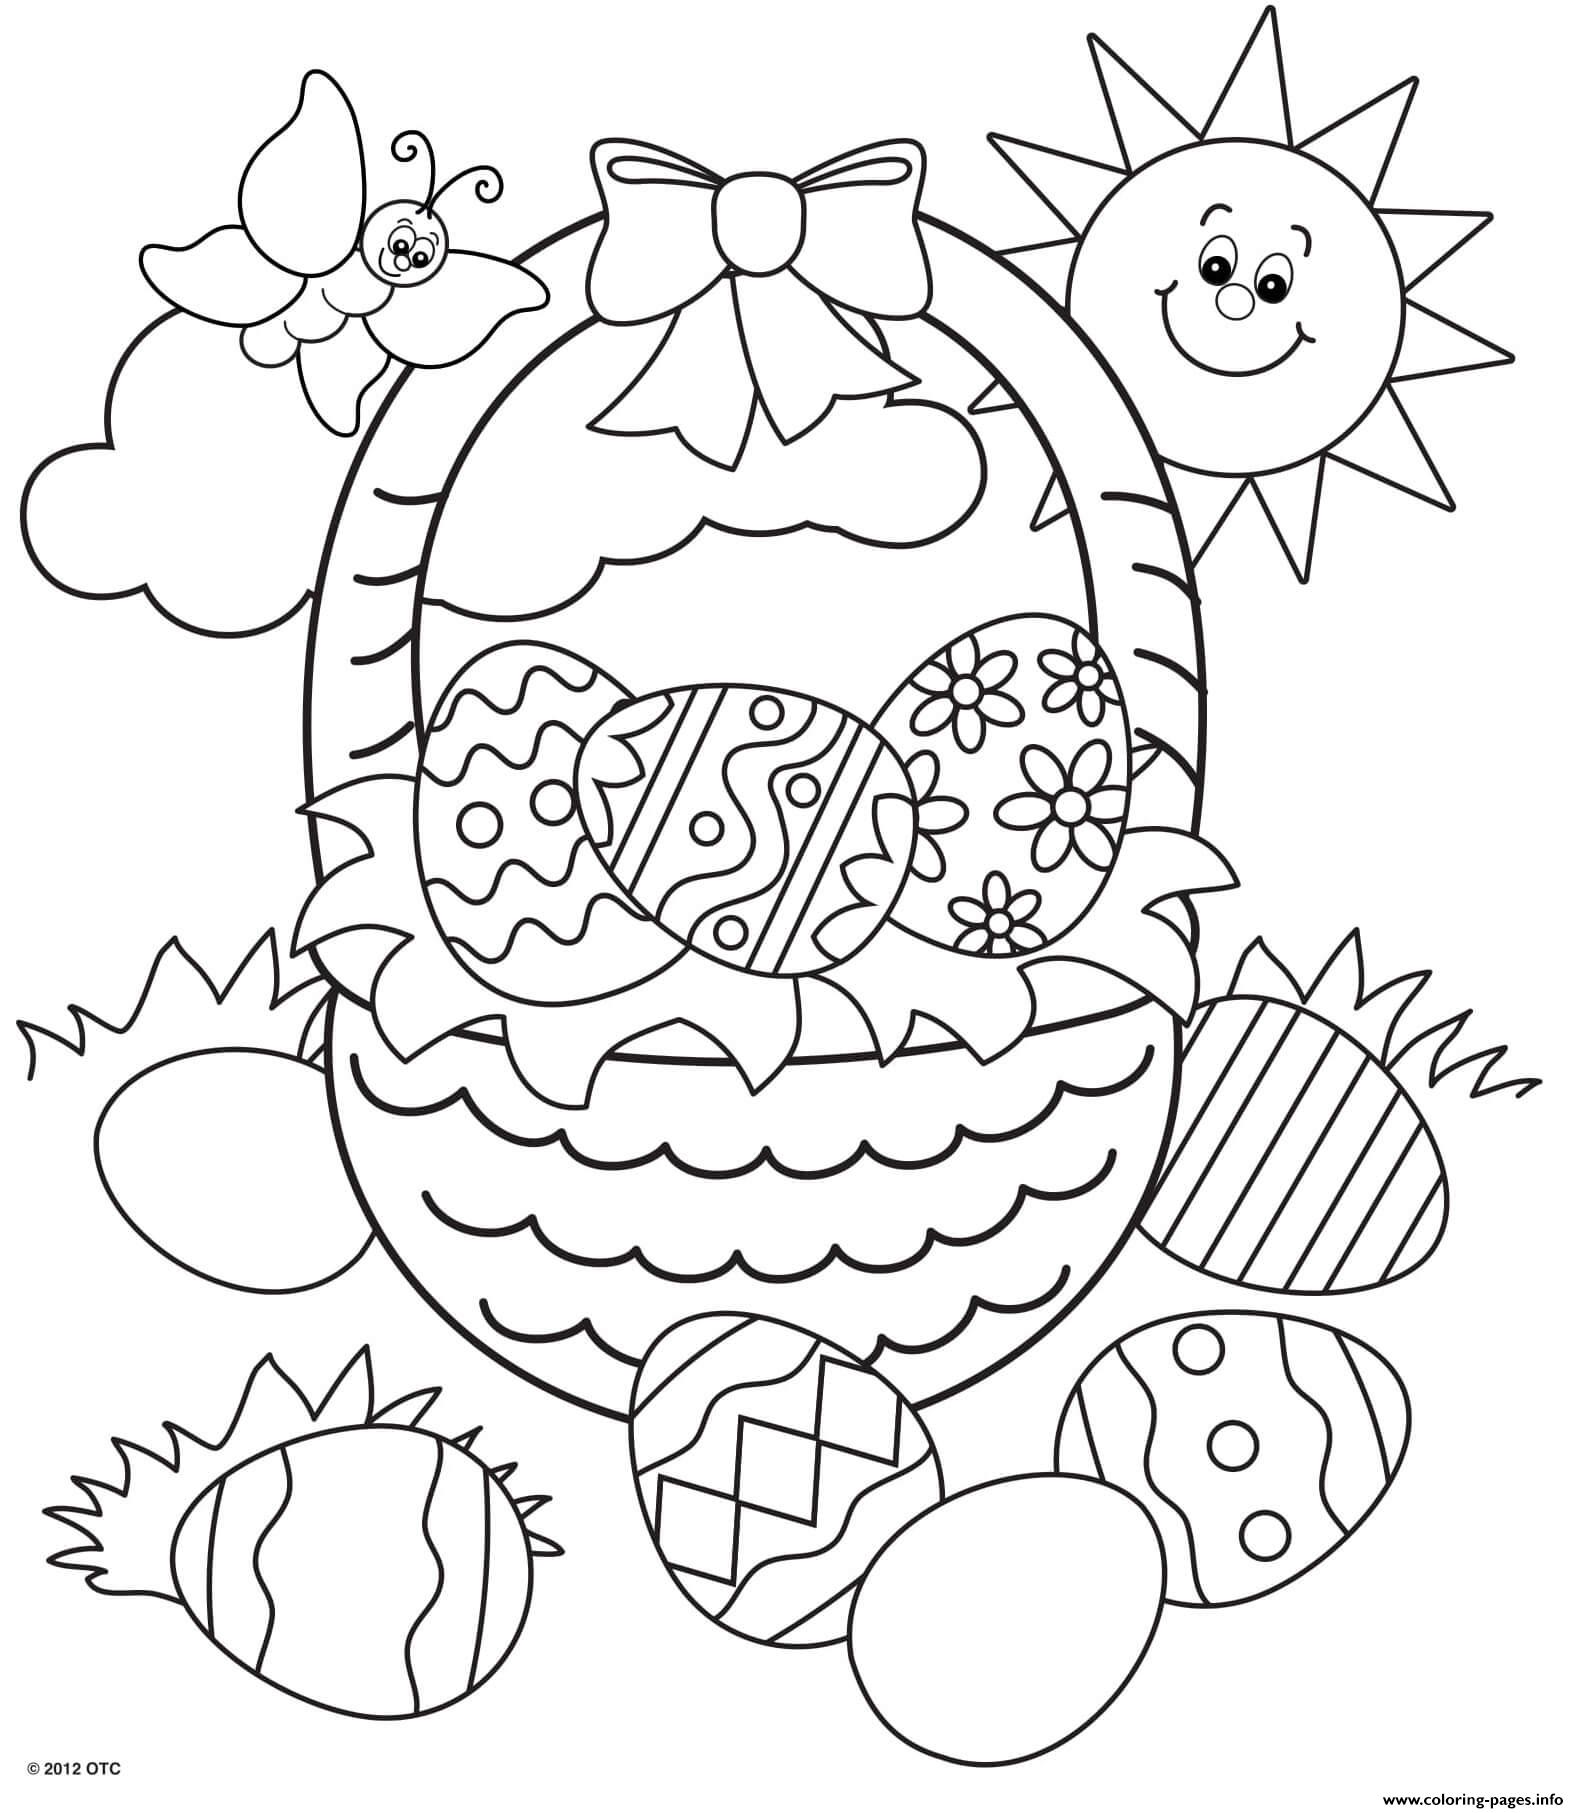 Basket Of Eggs Sun And Butterfly coloring